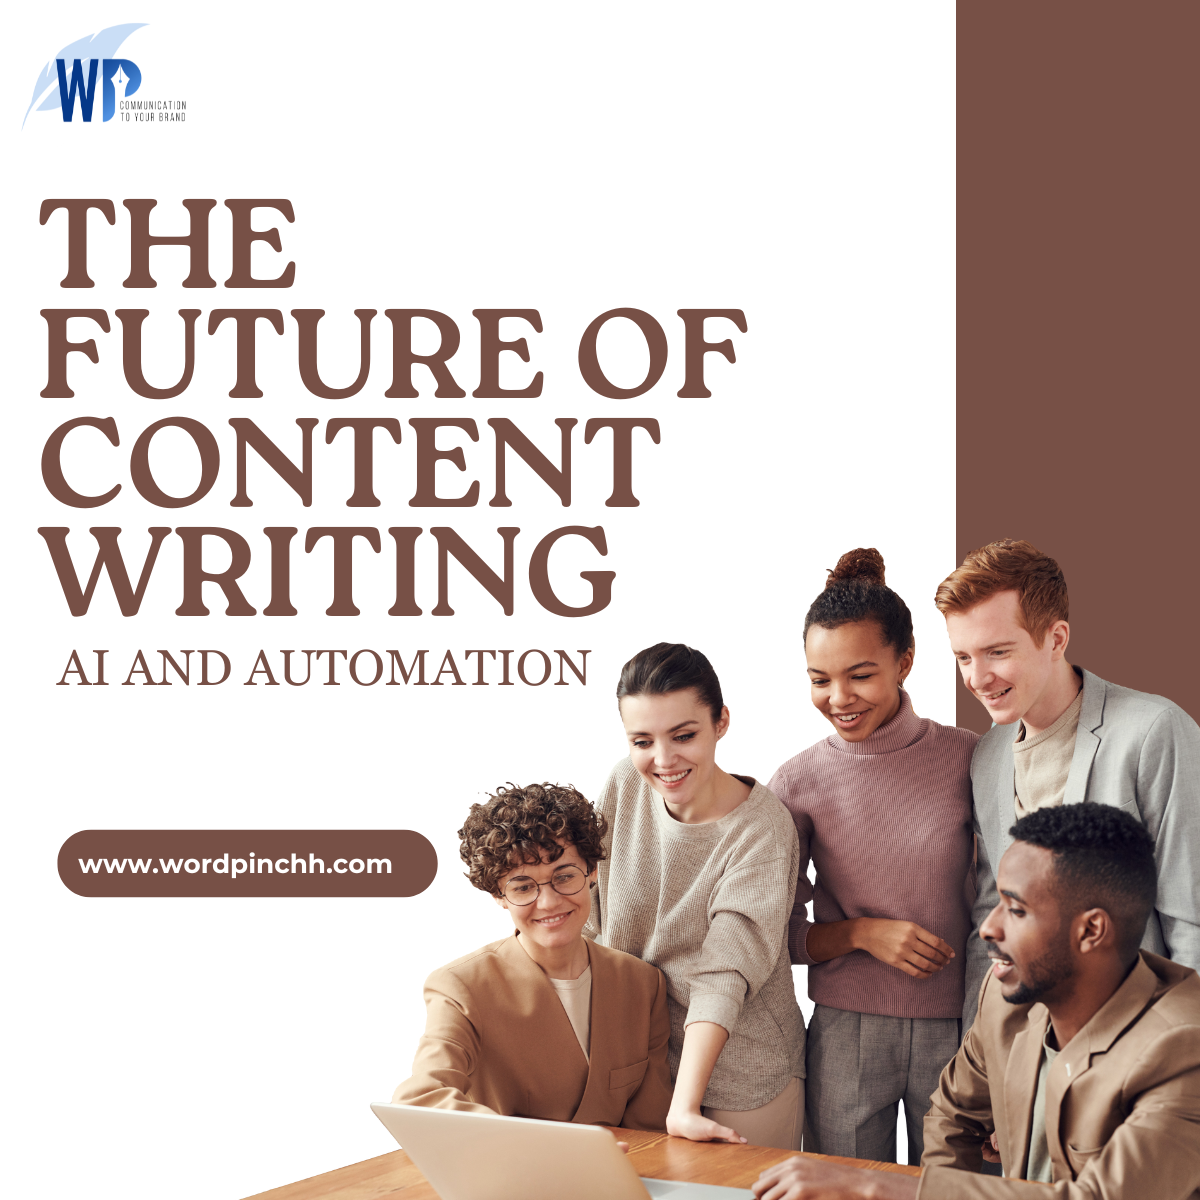 "The Future of Content Writing: AI and Automation"